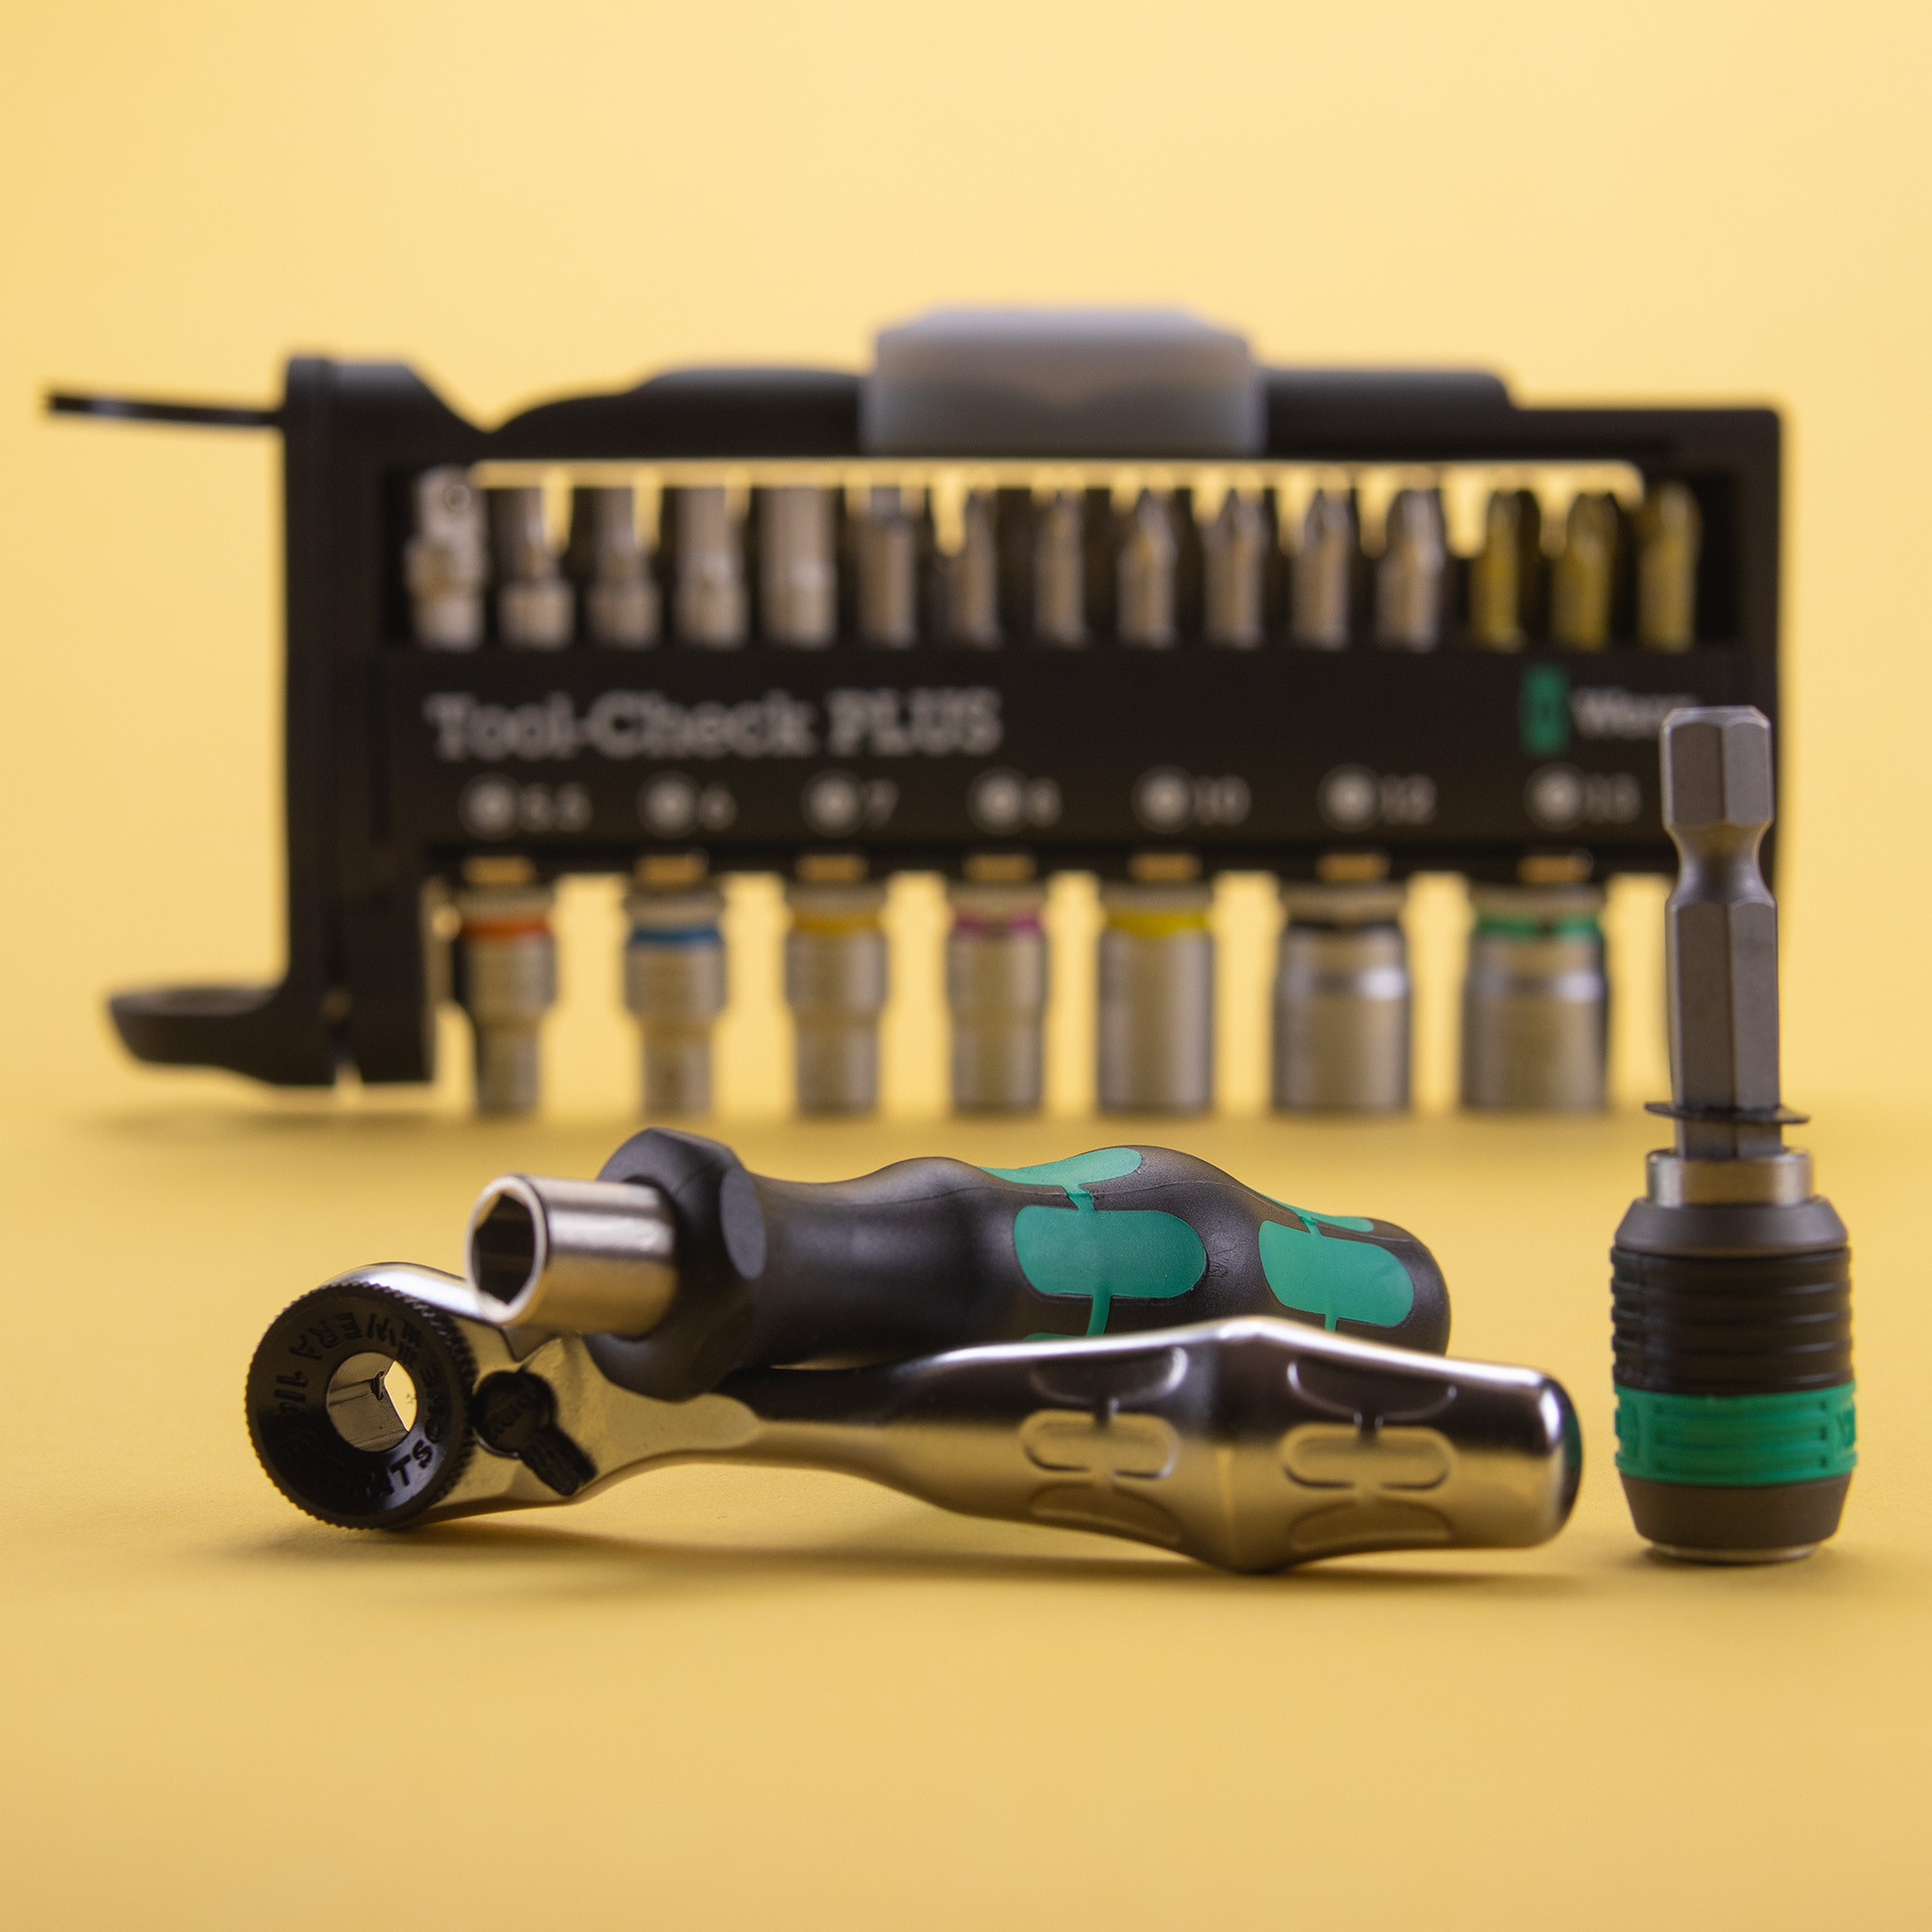 Wera ToolCheck Plus, Why its a great first Wera Tool! 